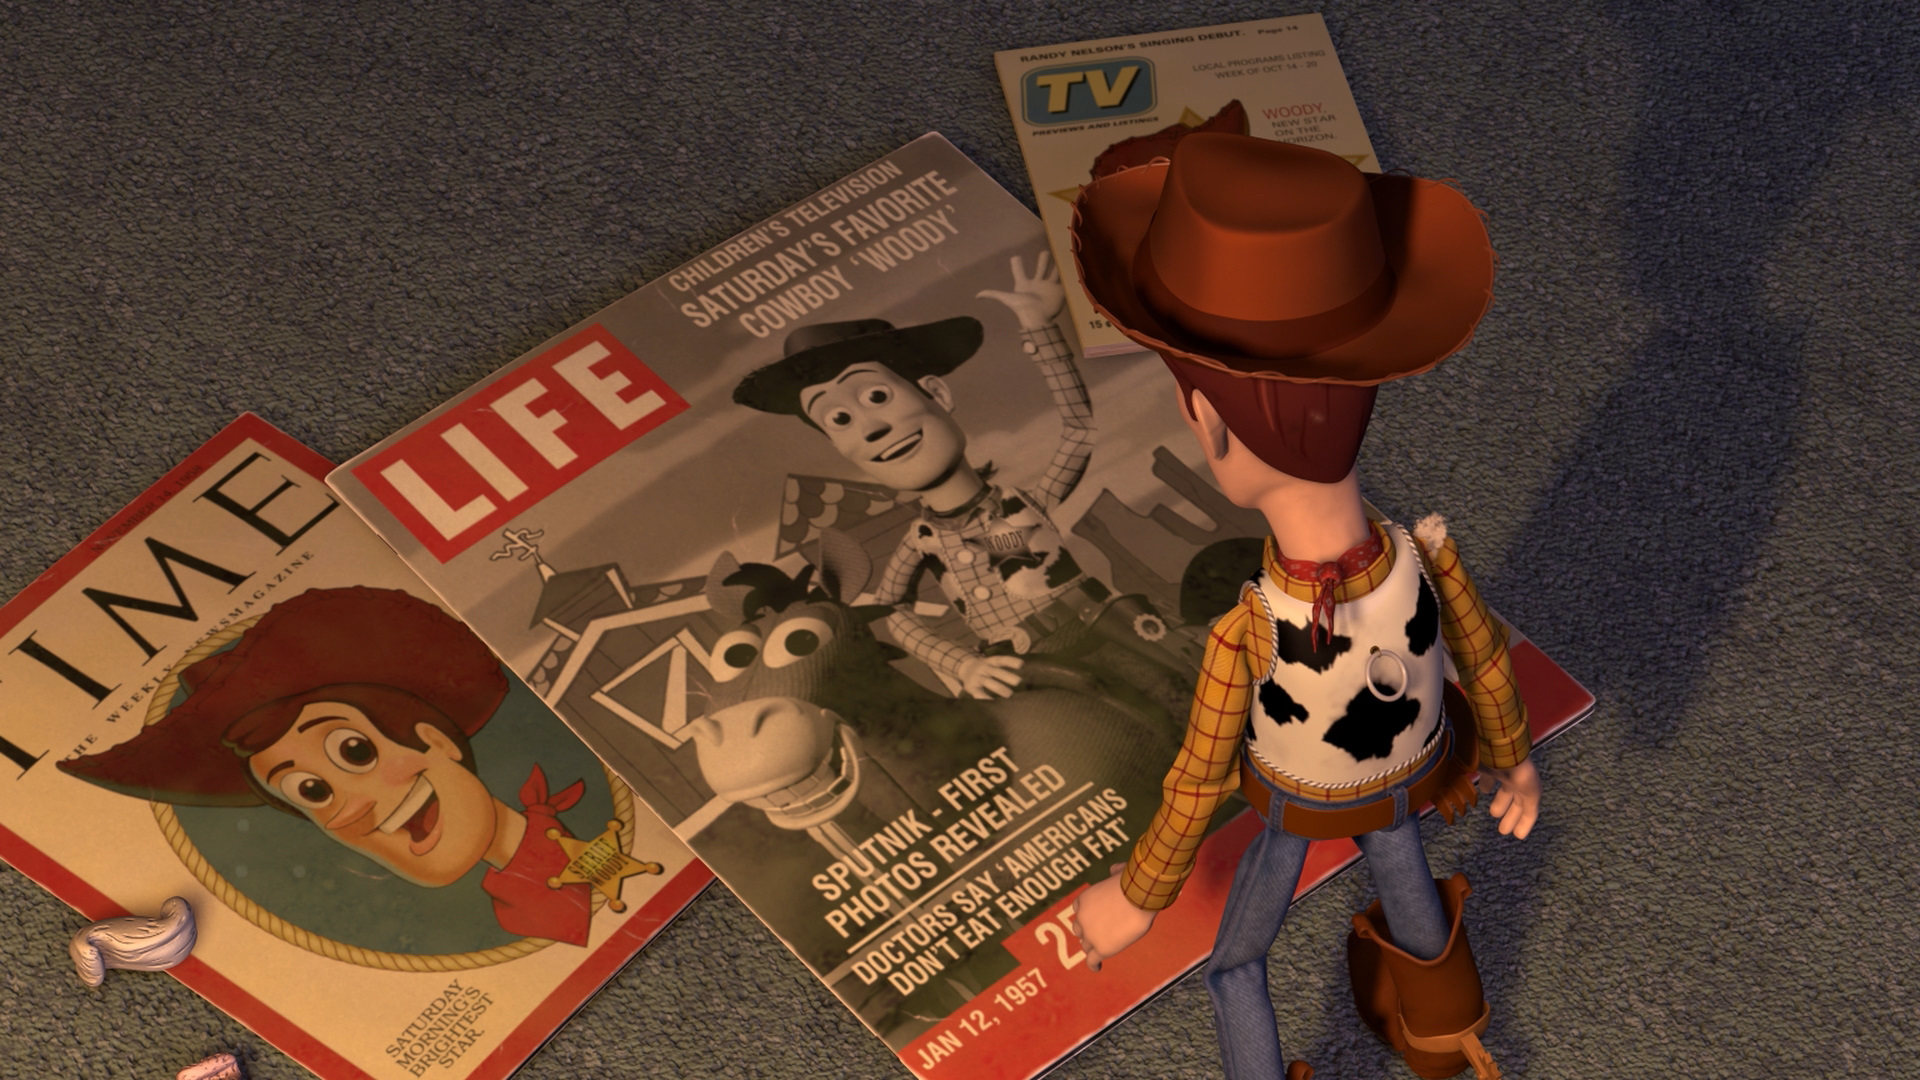 Movie Toy Story 2 HD Wallpaper | Background Image